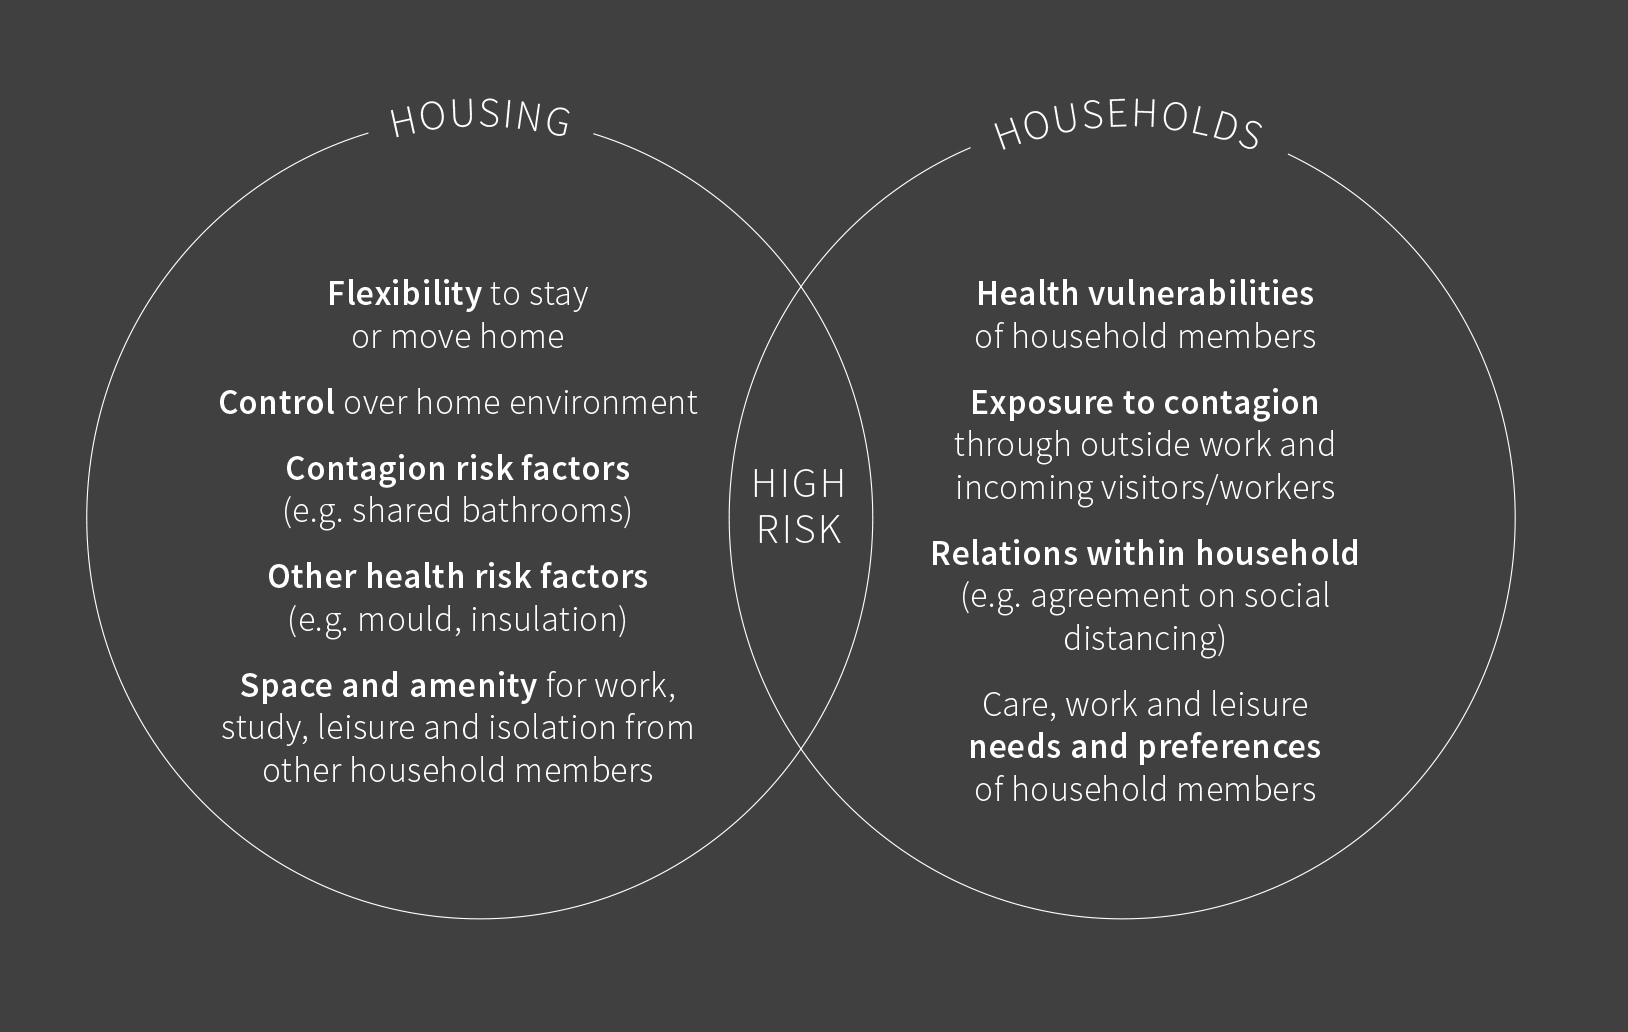 High risk factors for housing and households.